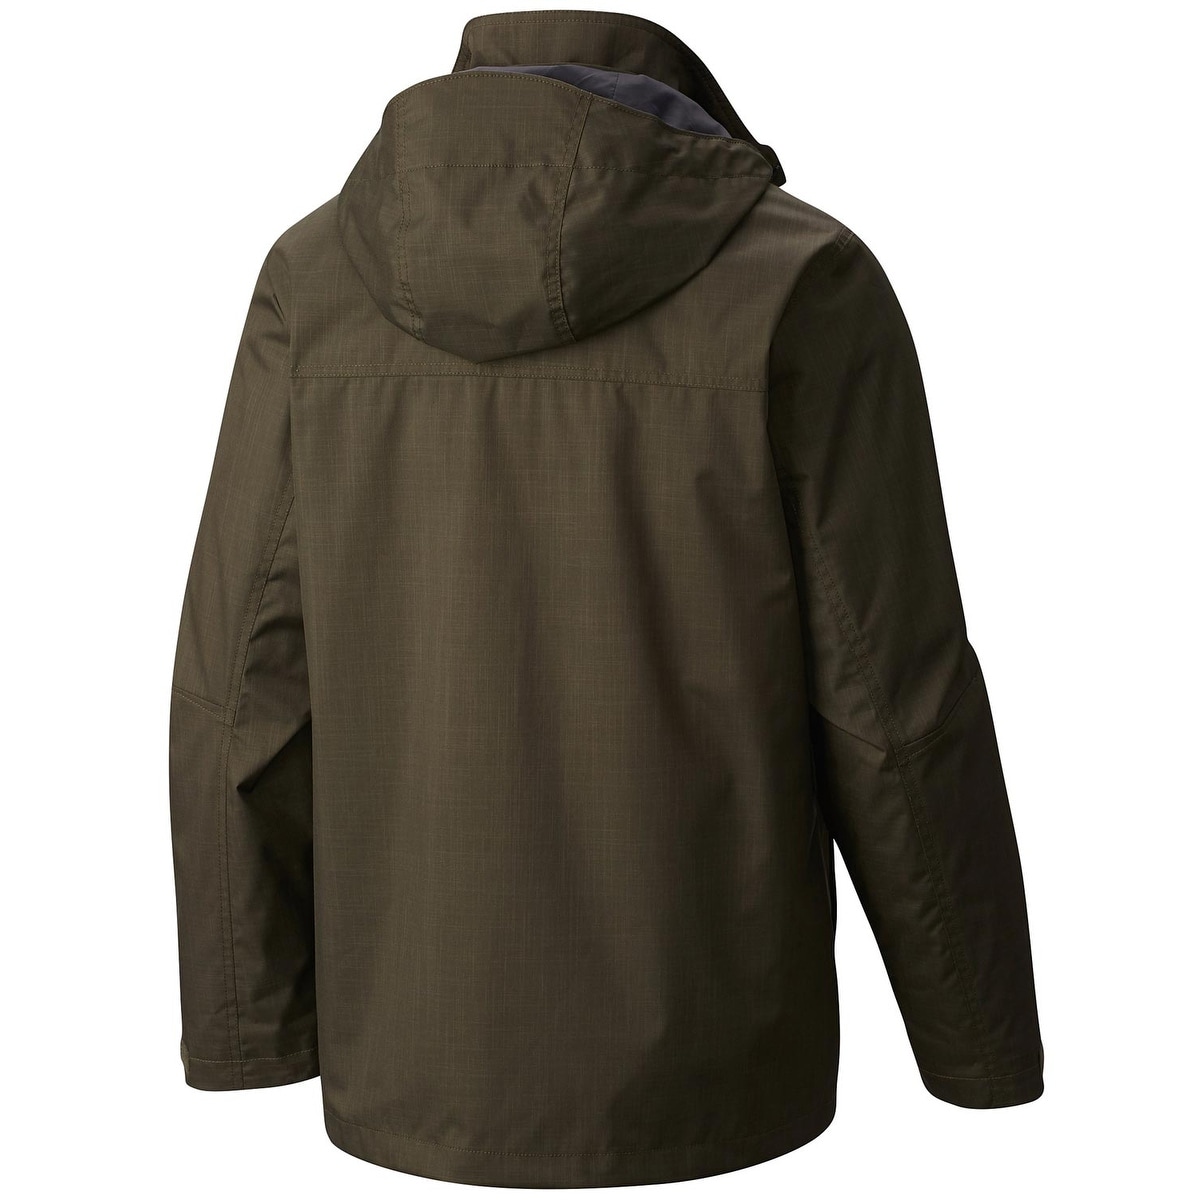 eagles call insulated jacket